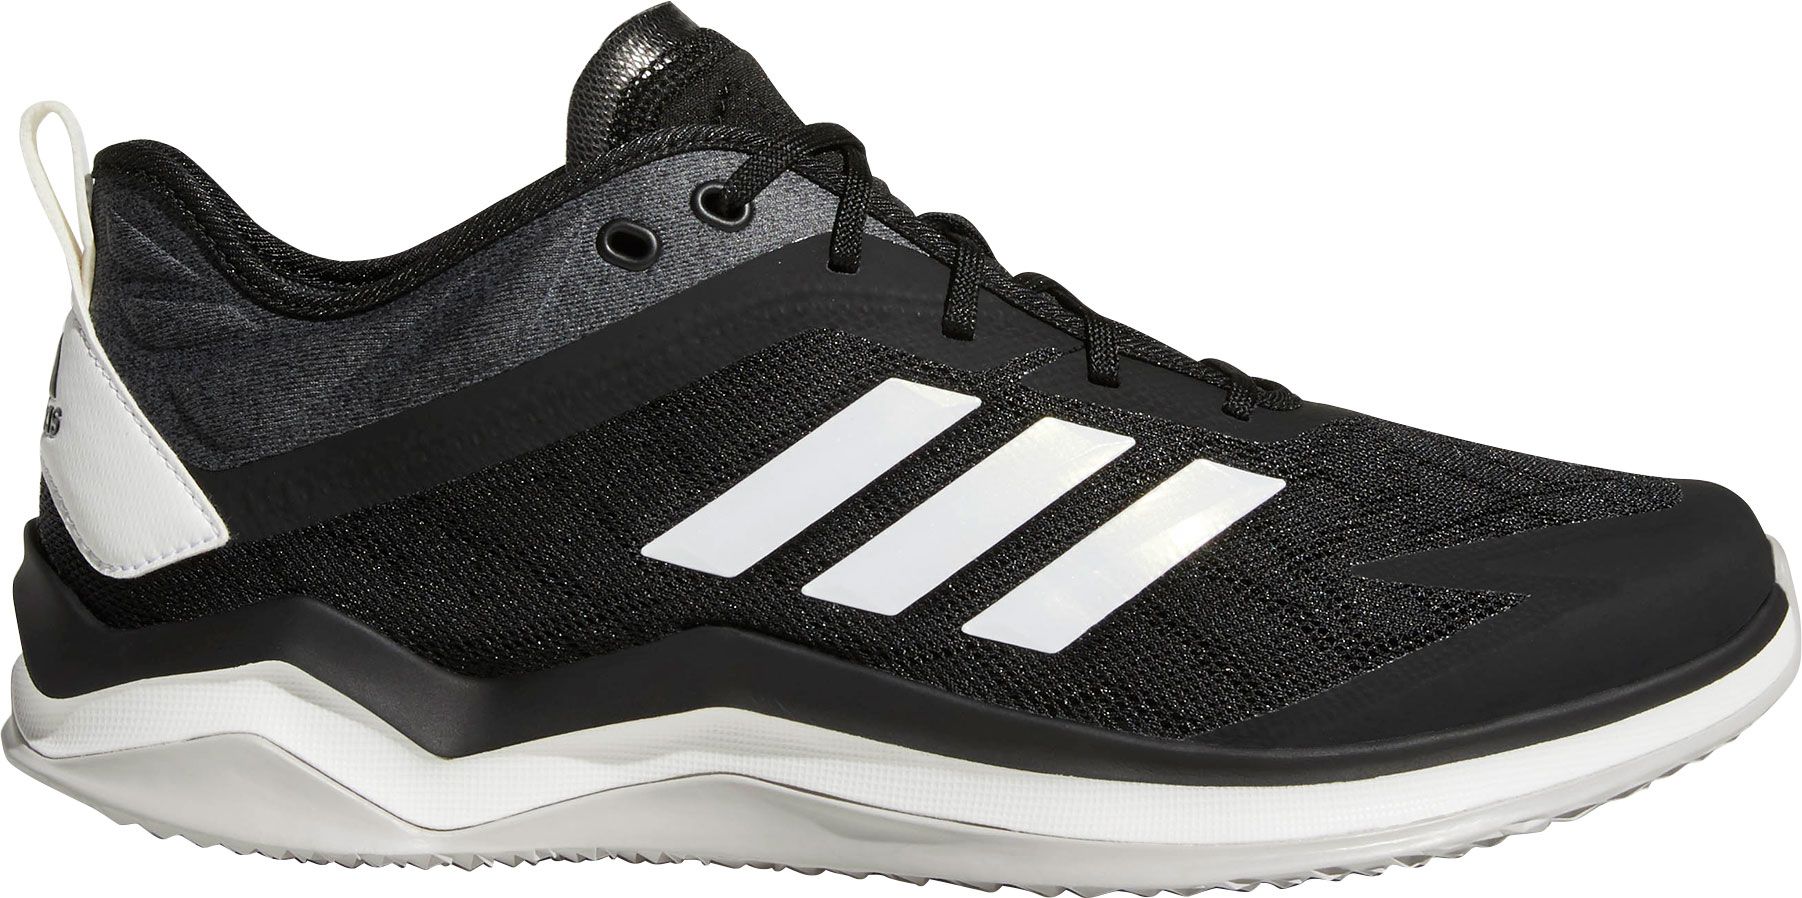 Speed Trainer 4 Baseball Turf Shoes 